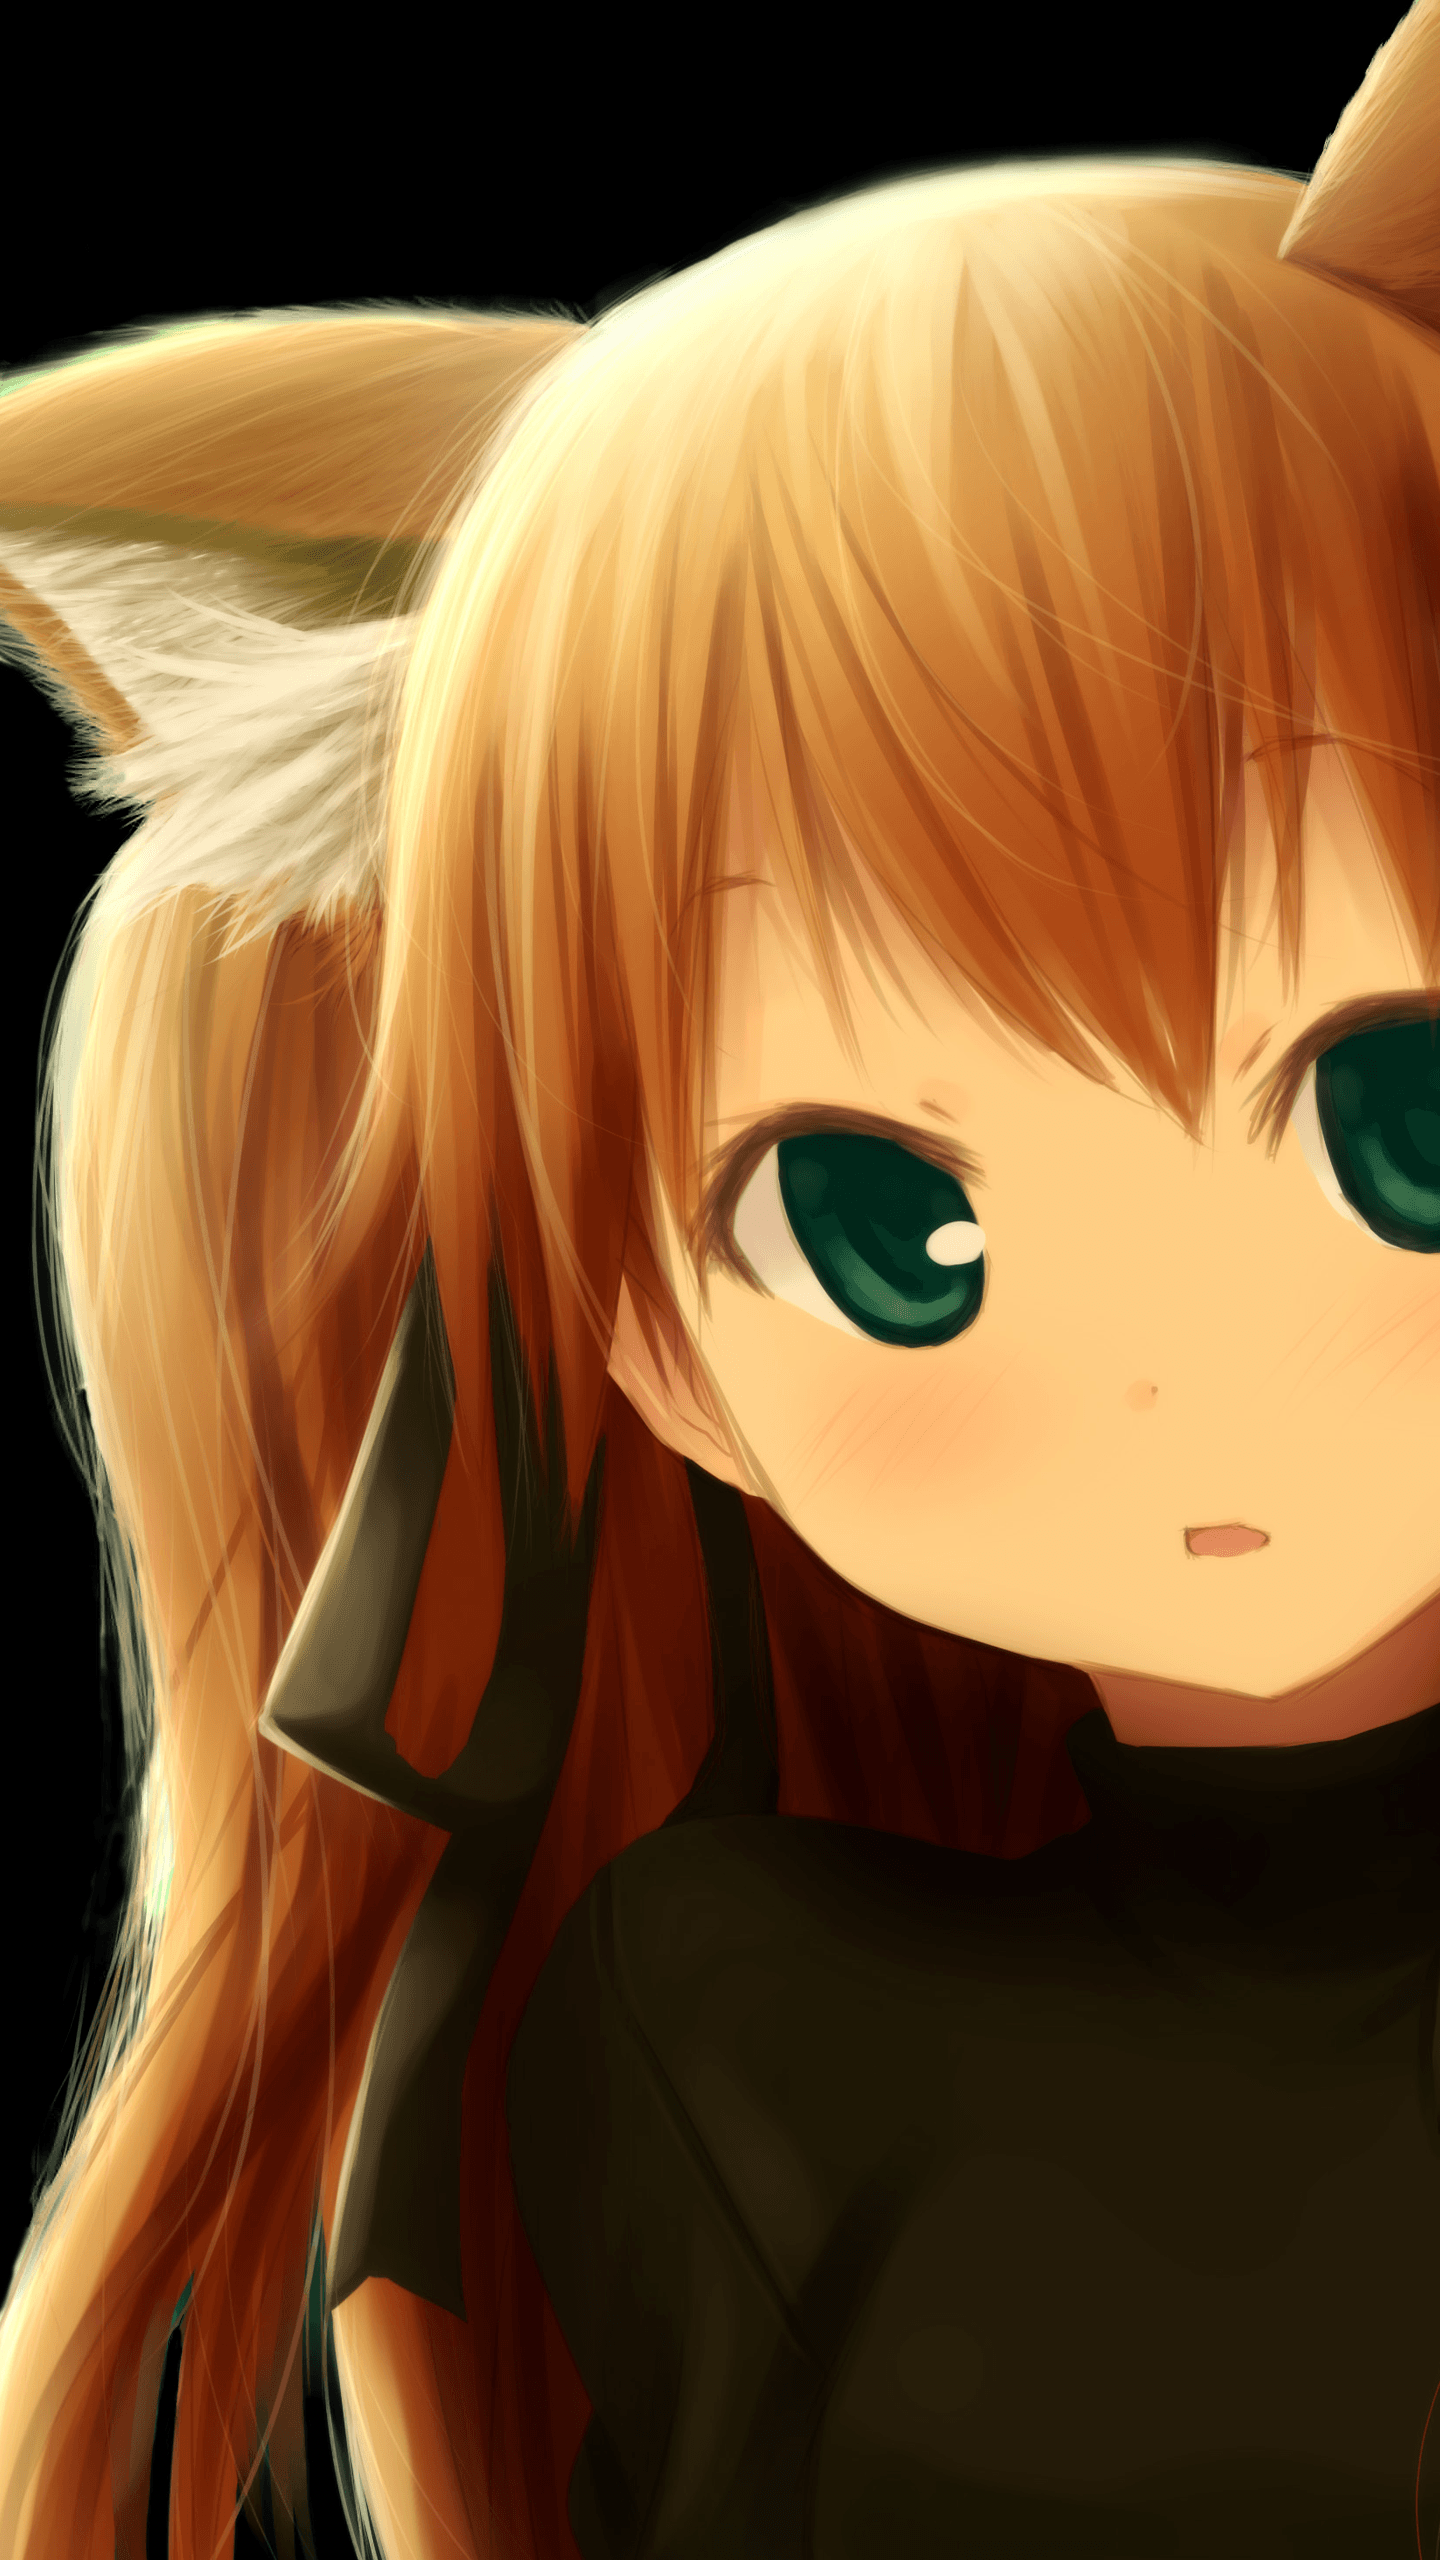 Cute Fox Anime Wallpapers - Wallpaper Cave